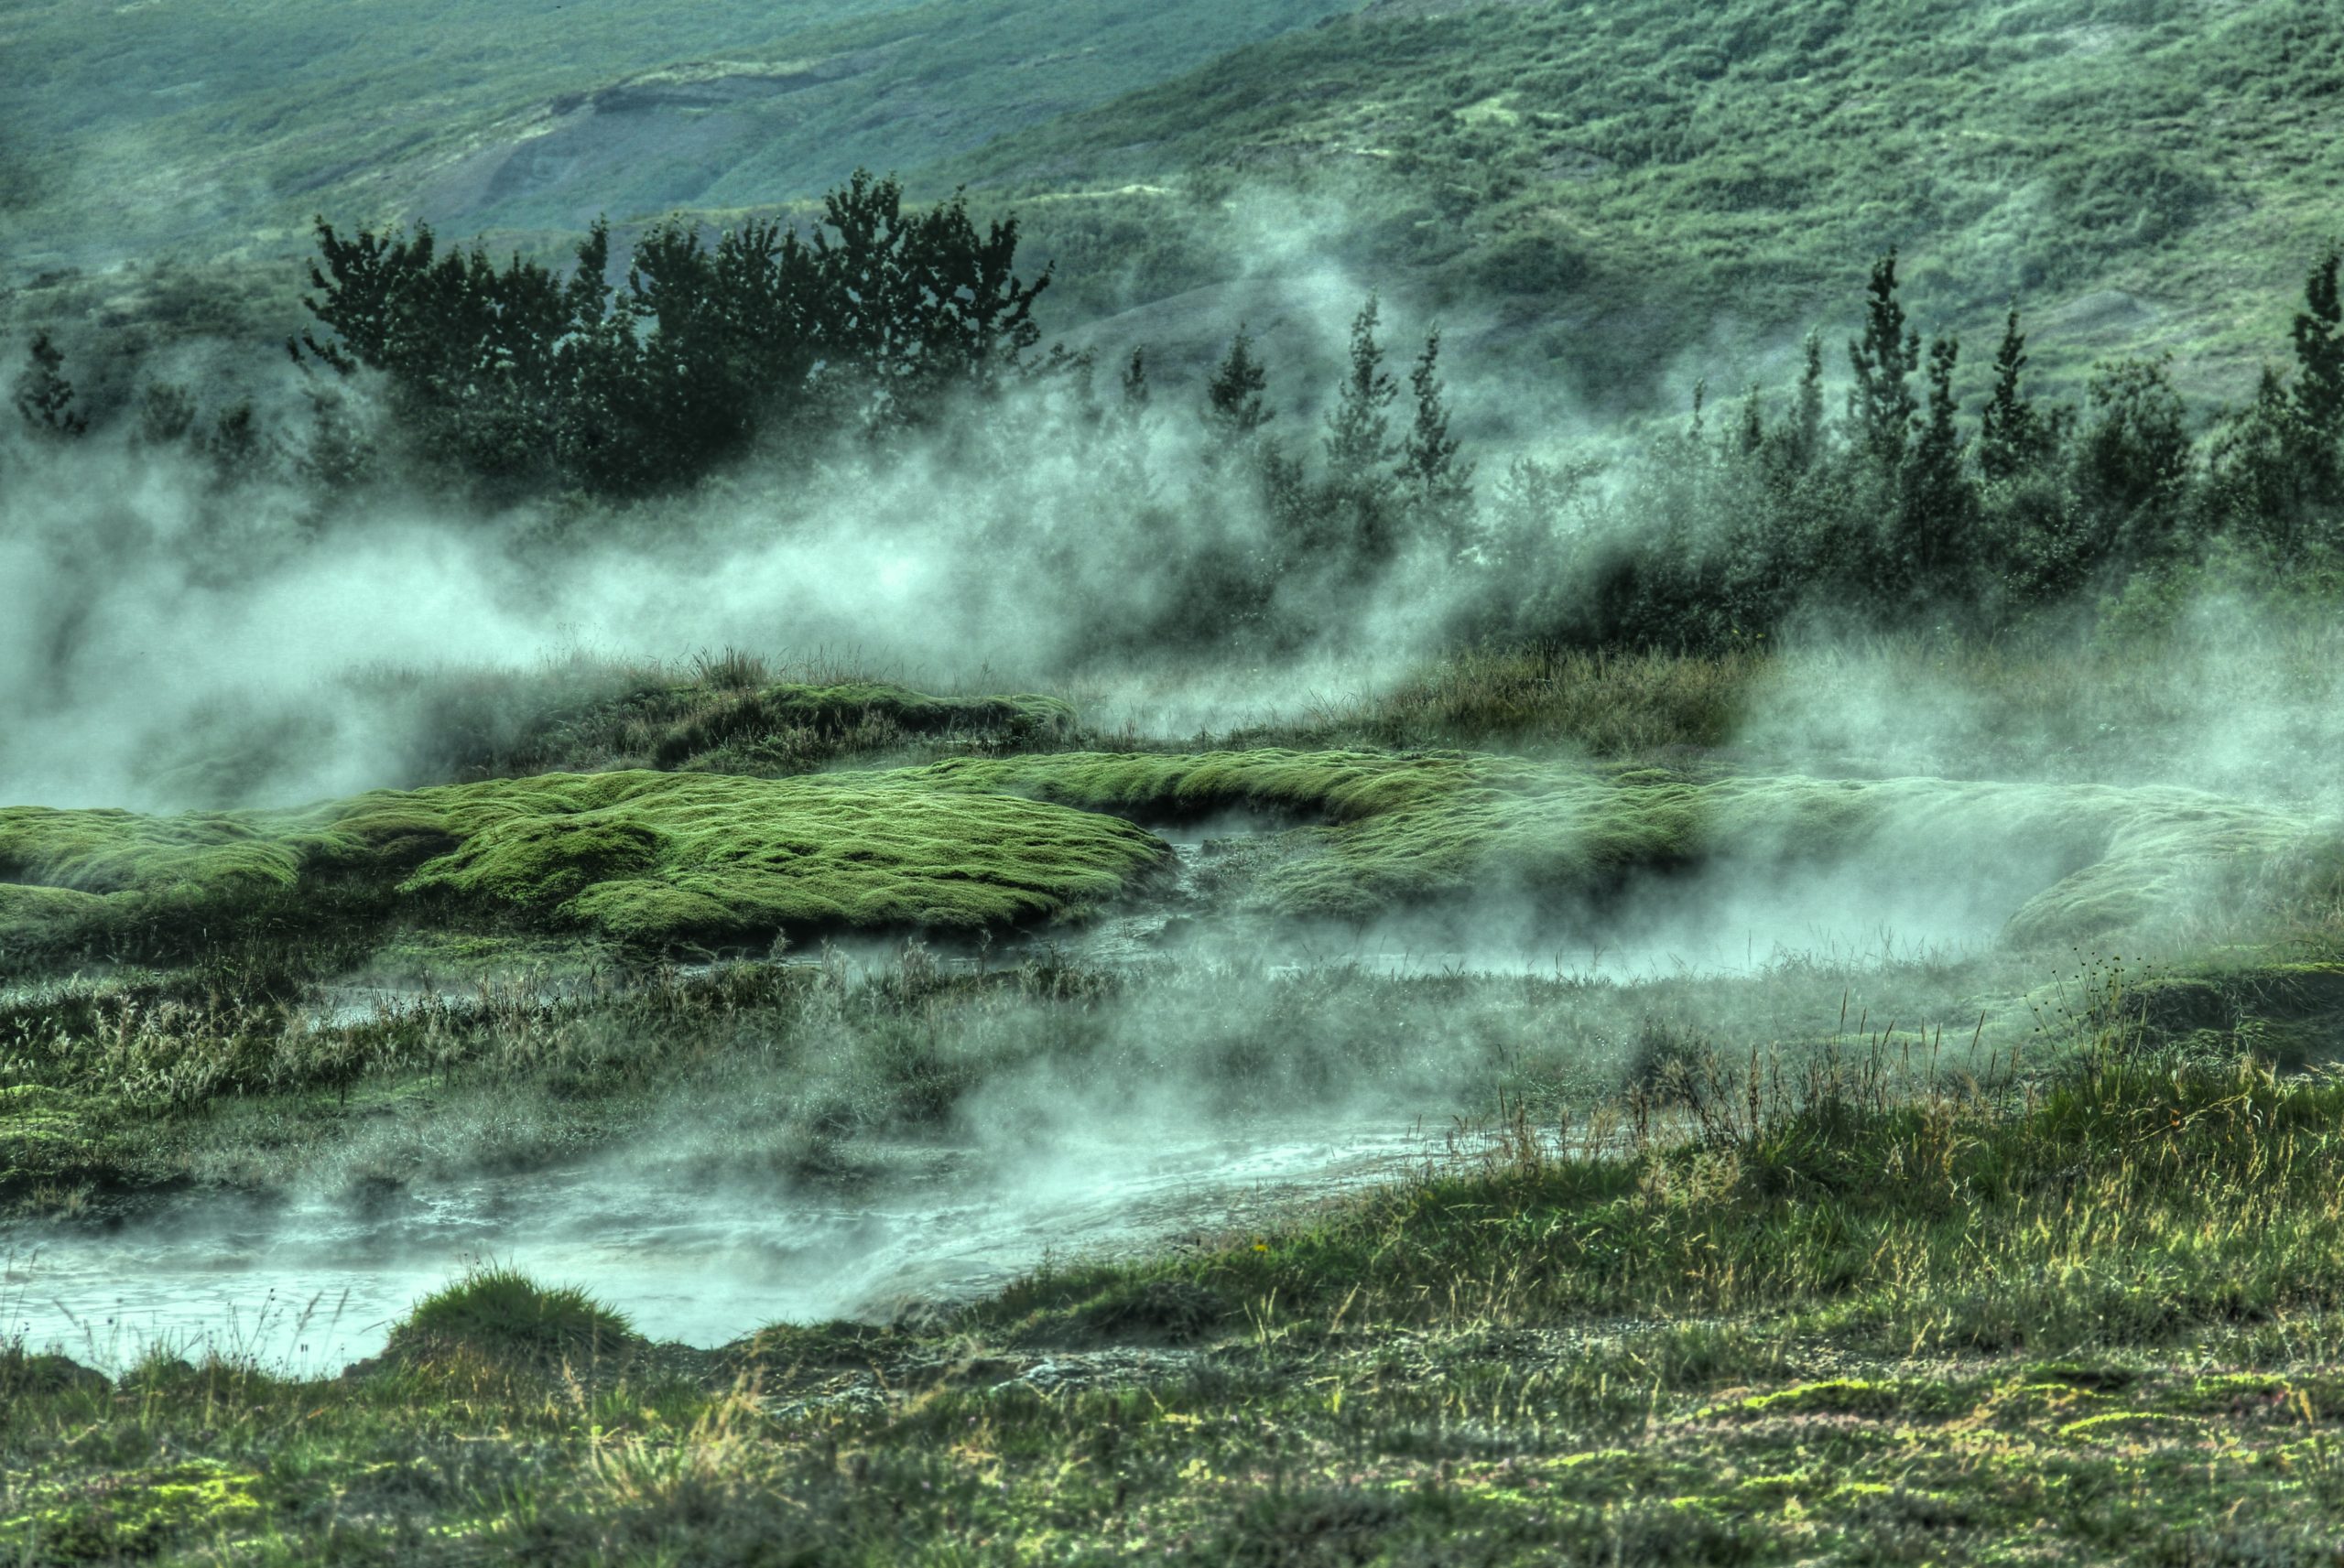 Geothermal steam billowing into the air in Iceland.